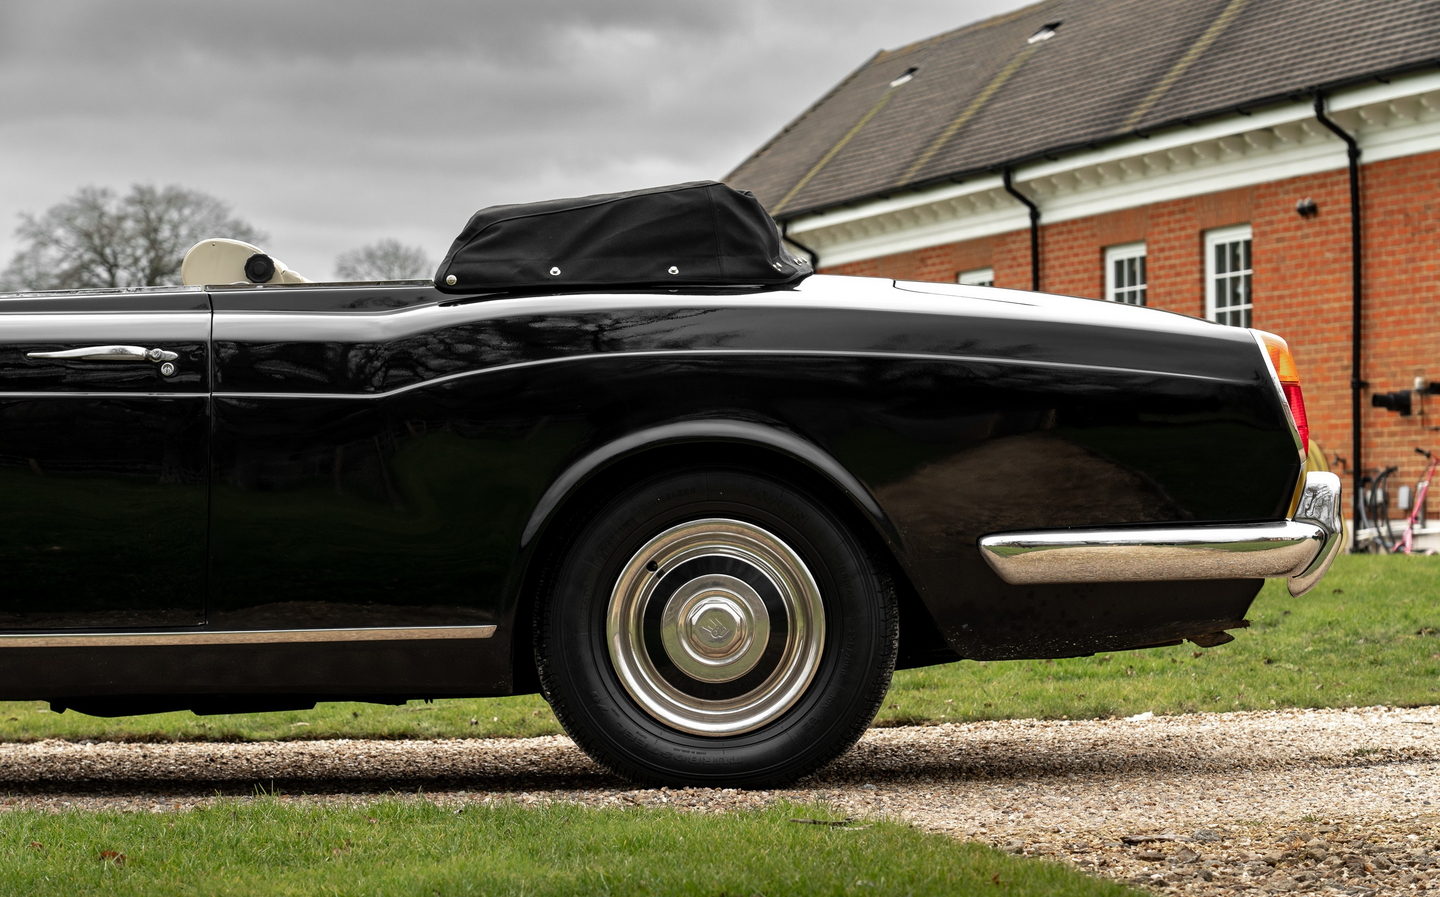 Sir Michael Caine’s first car, a 1968 Rolls-Royce Silver Shadow, heads to auction